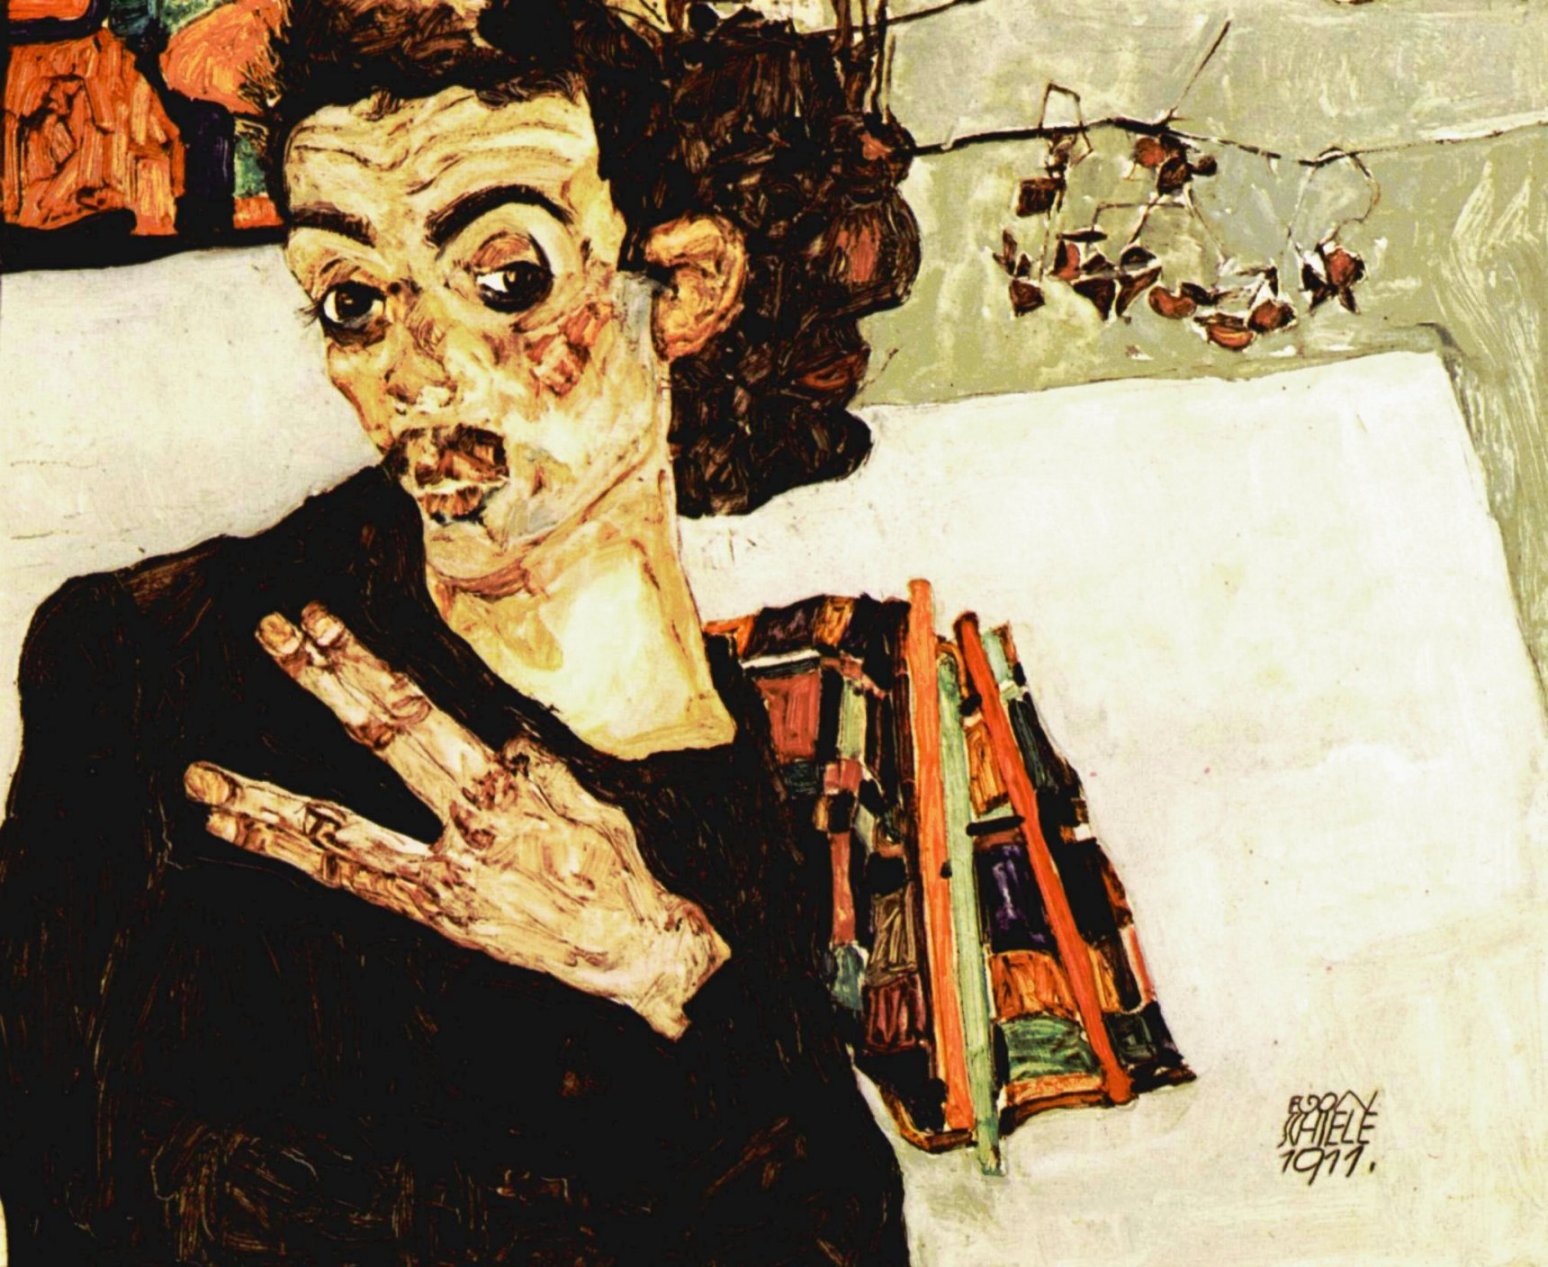 Self-Portrait with Black Vase and Spread Fingers by Egon Schiele - 1911 - 27.5 x 34 cm Kunsthistorisches Museum